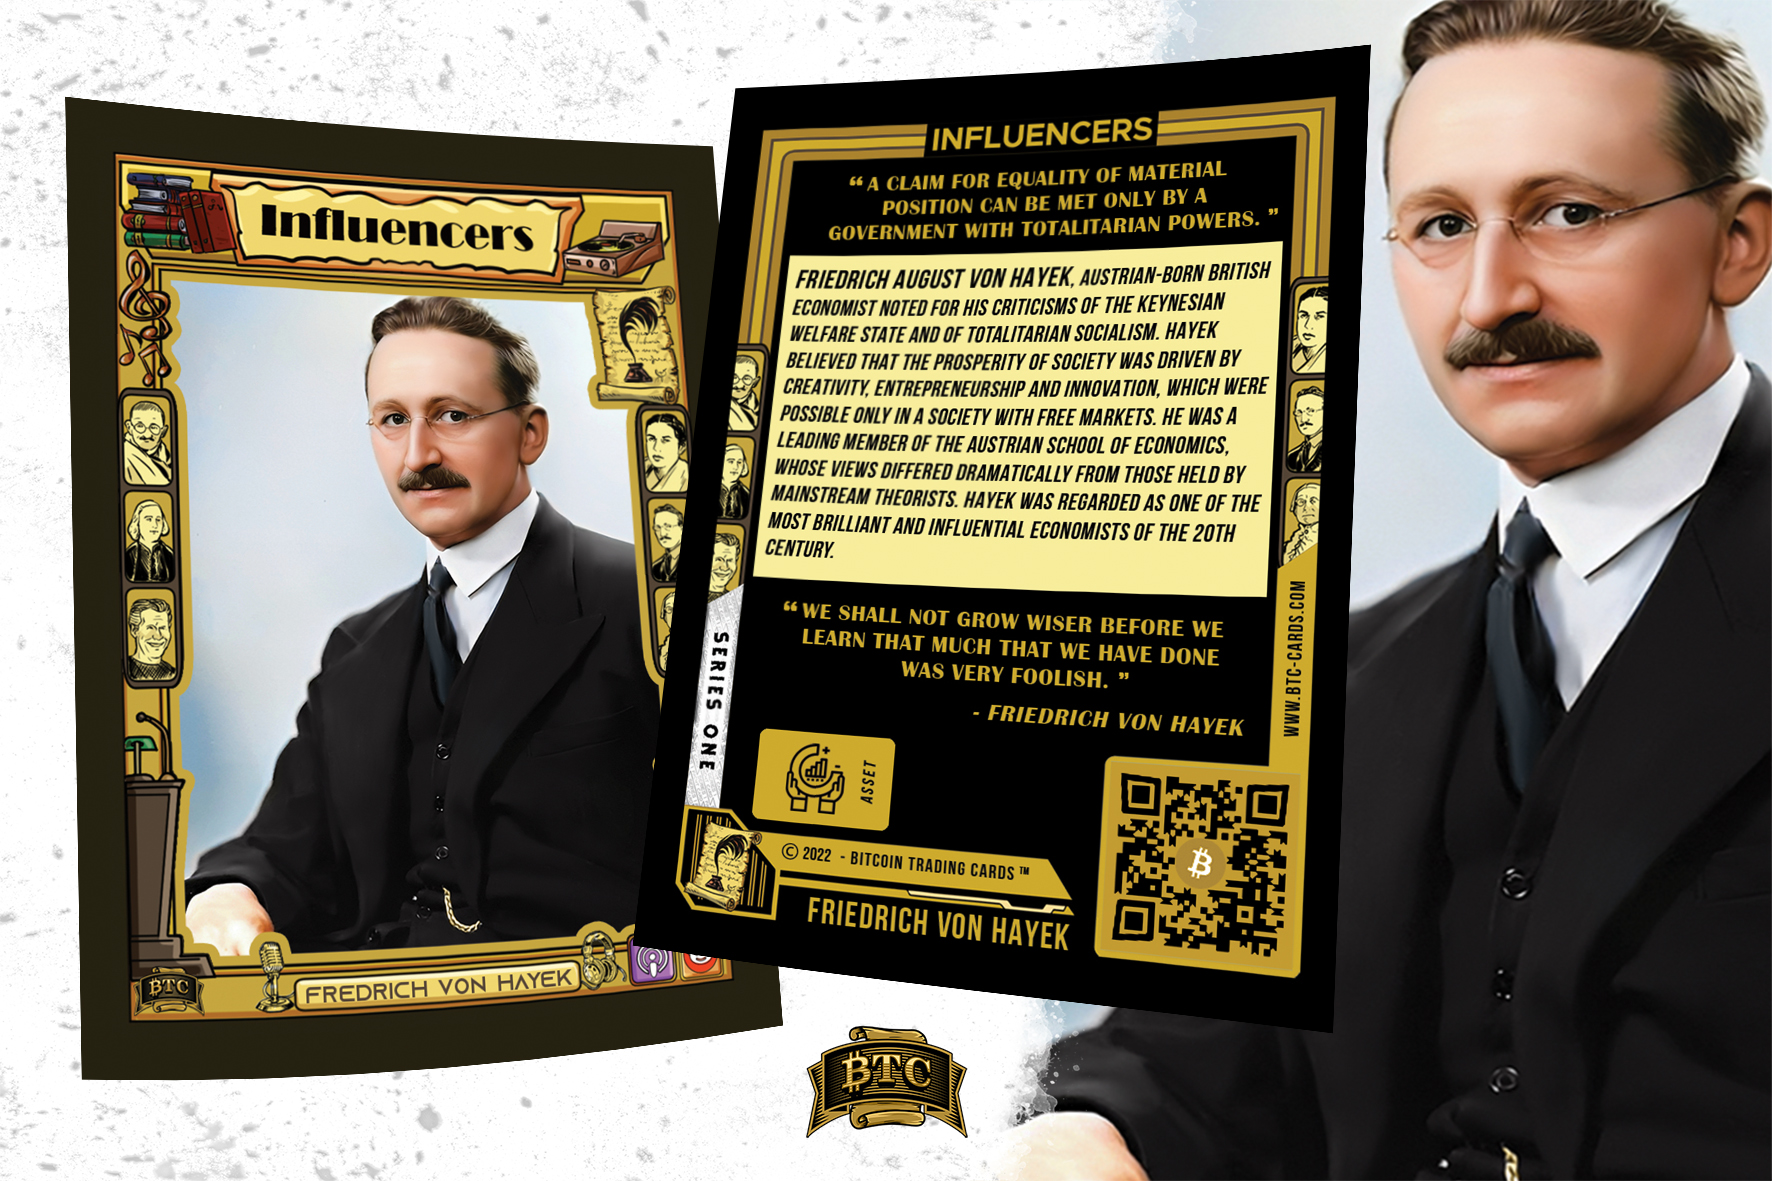 trading card - front